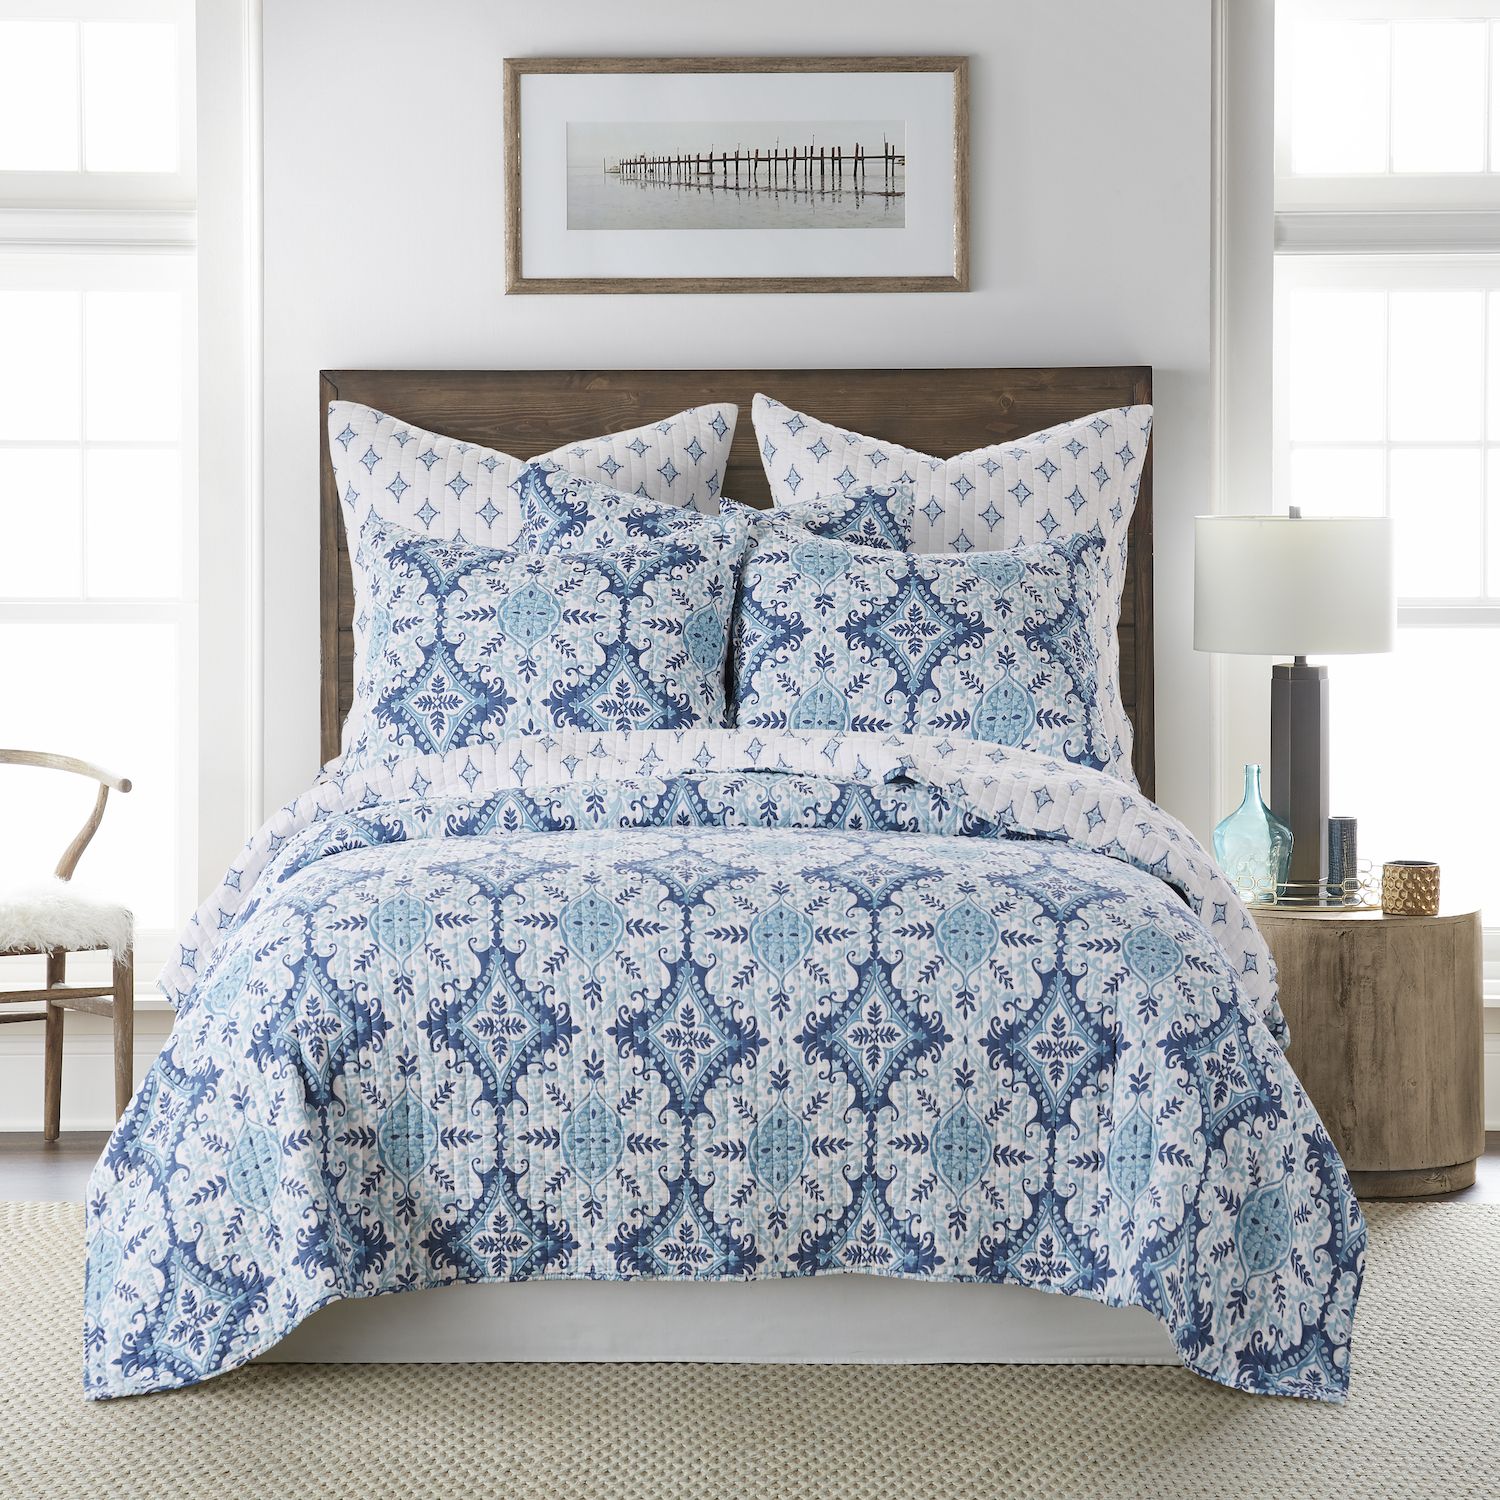 Image for Homthreads Essella Indigo Quilt Set and Shams at Kohl's.